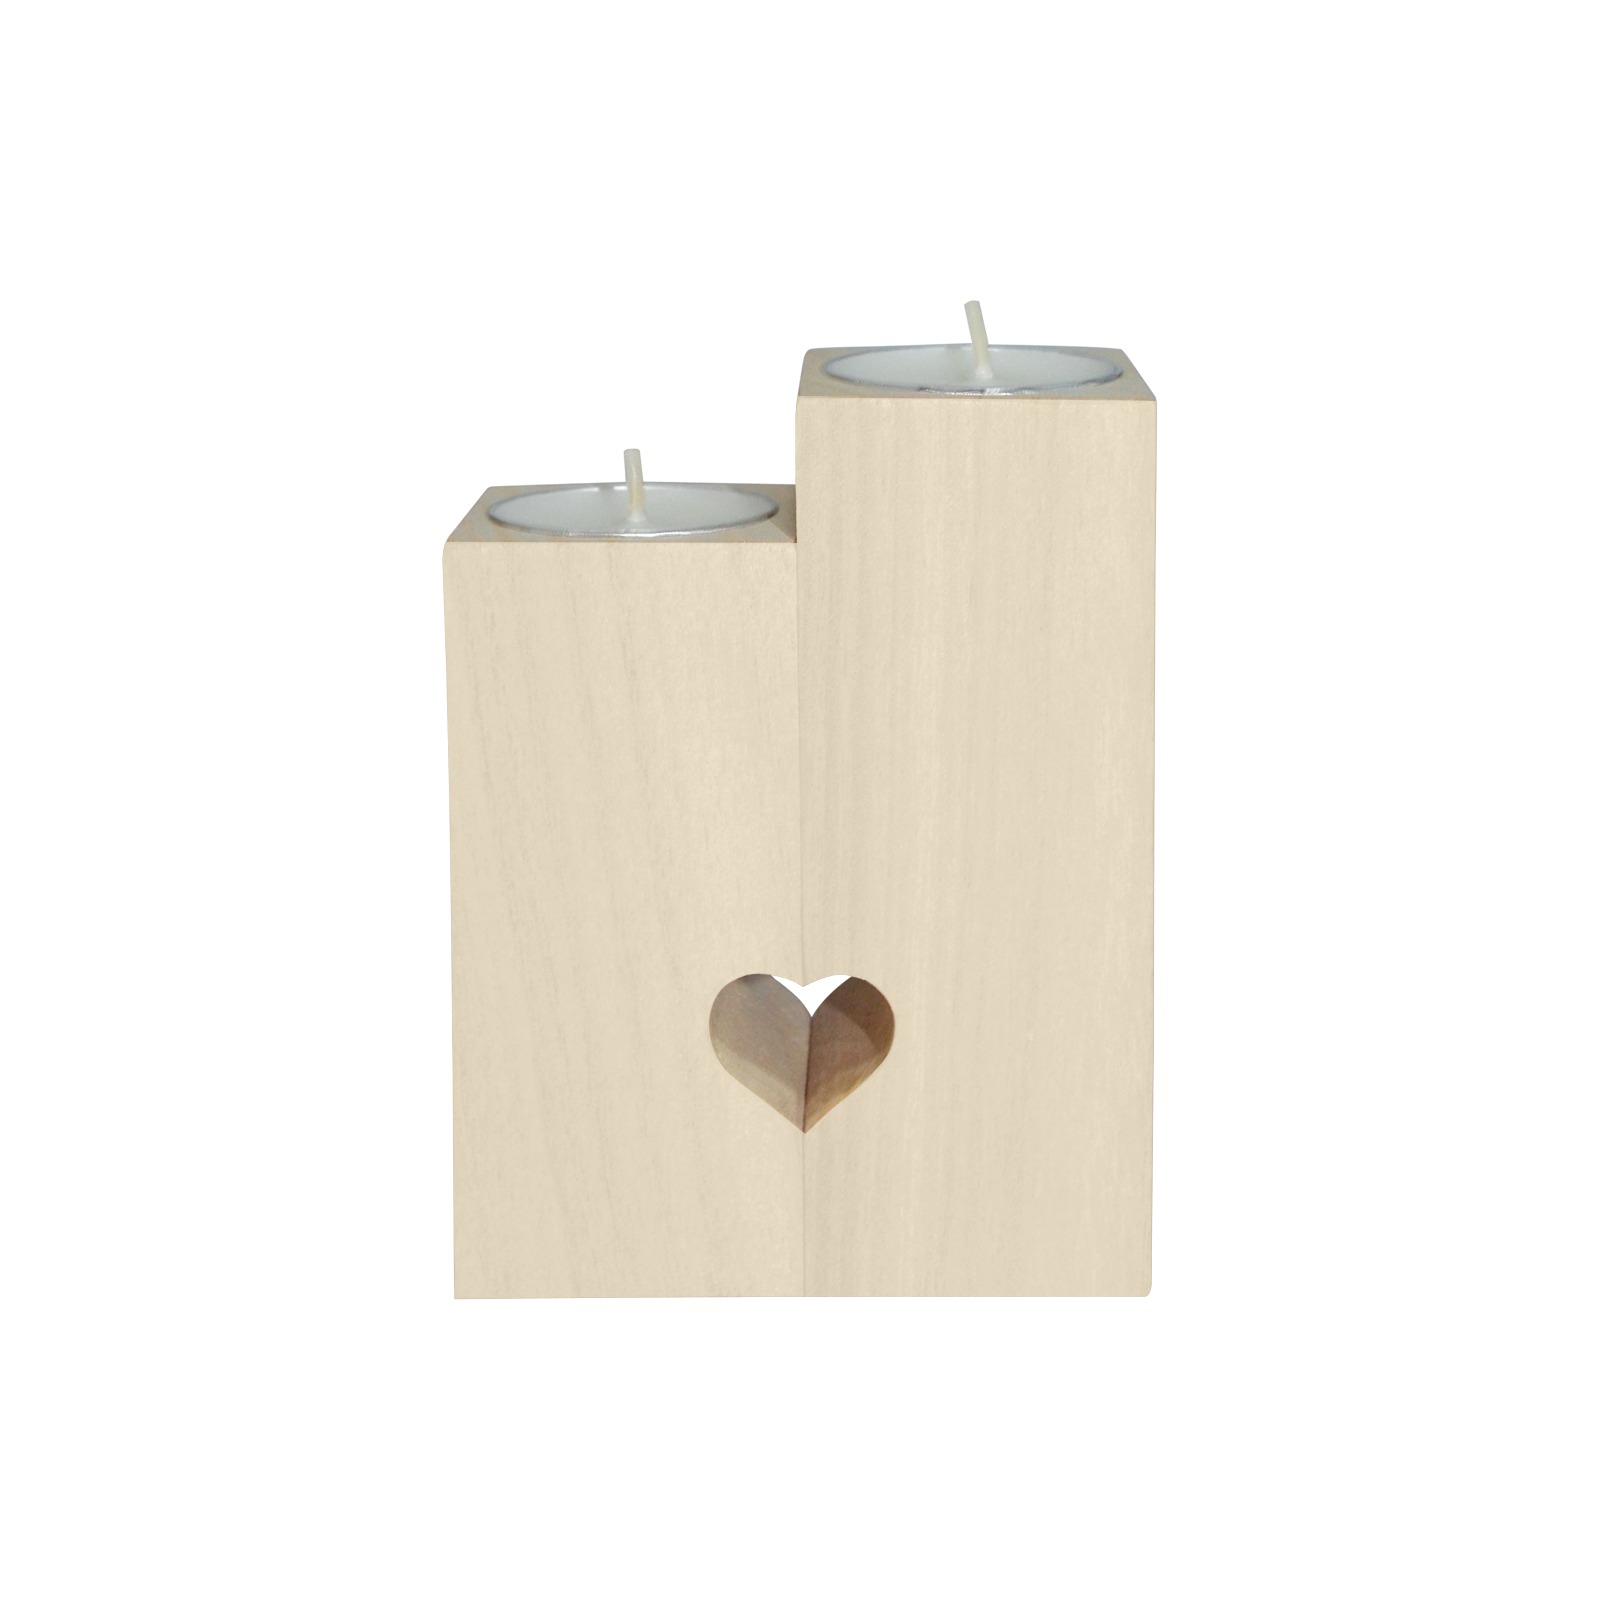 Liberation - A Prayer For The Overwhelmed - Wooden Candle Holder (Without Candle)